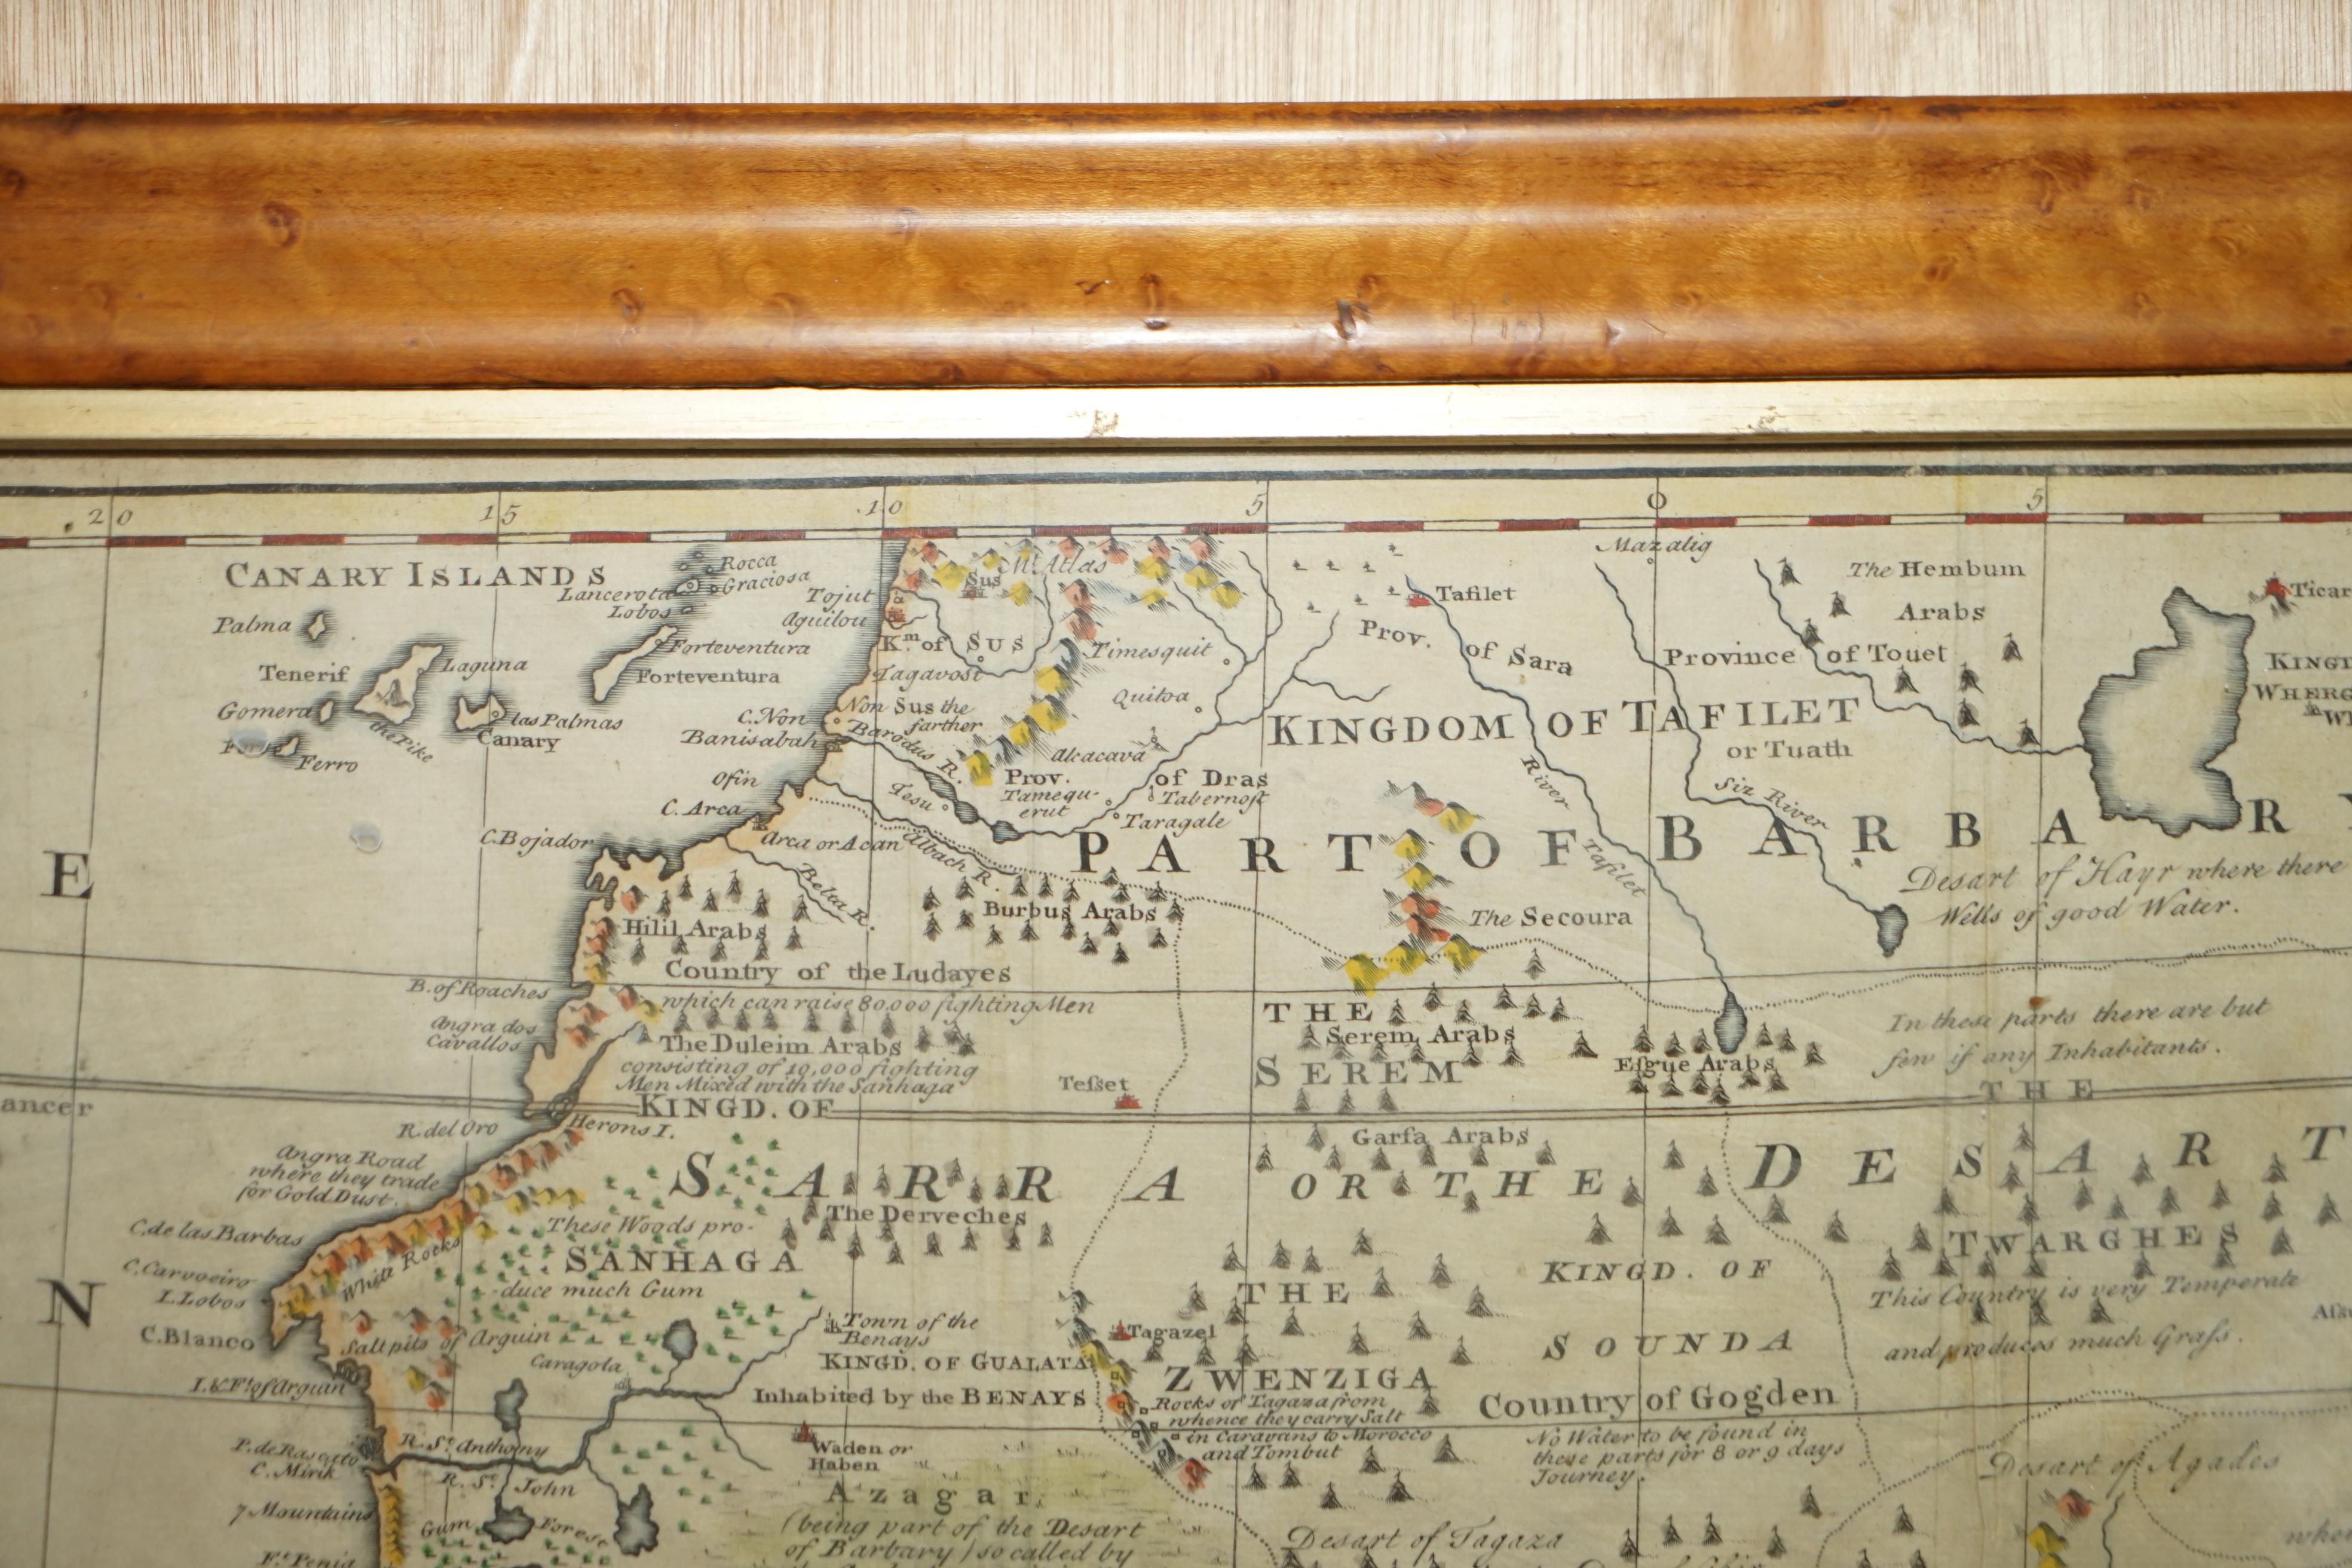 20th Century 1747 British Map Showing the Kingdom of Judah on the West Coast of Africa